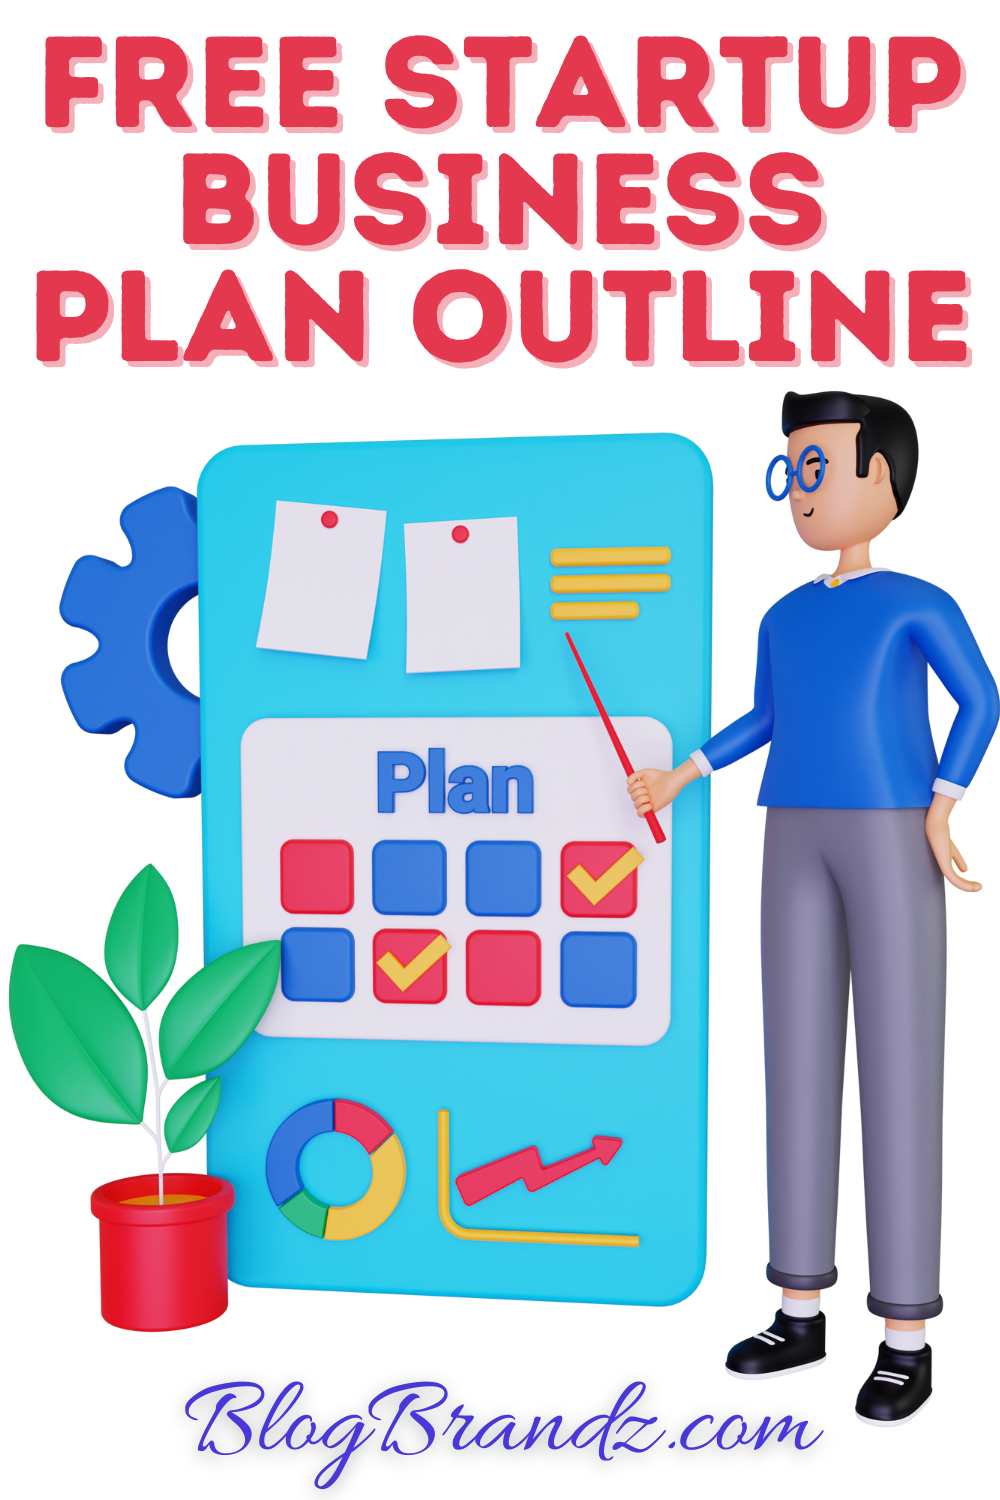 Free Startup Business Plan Outline